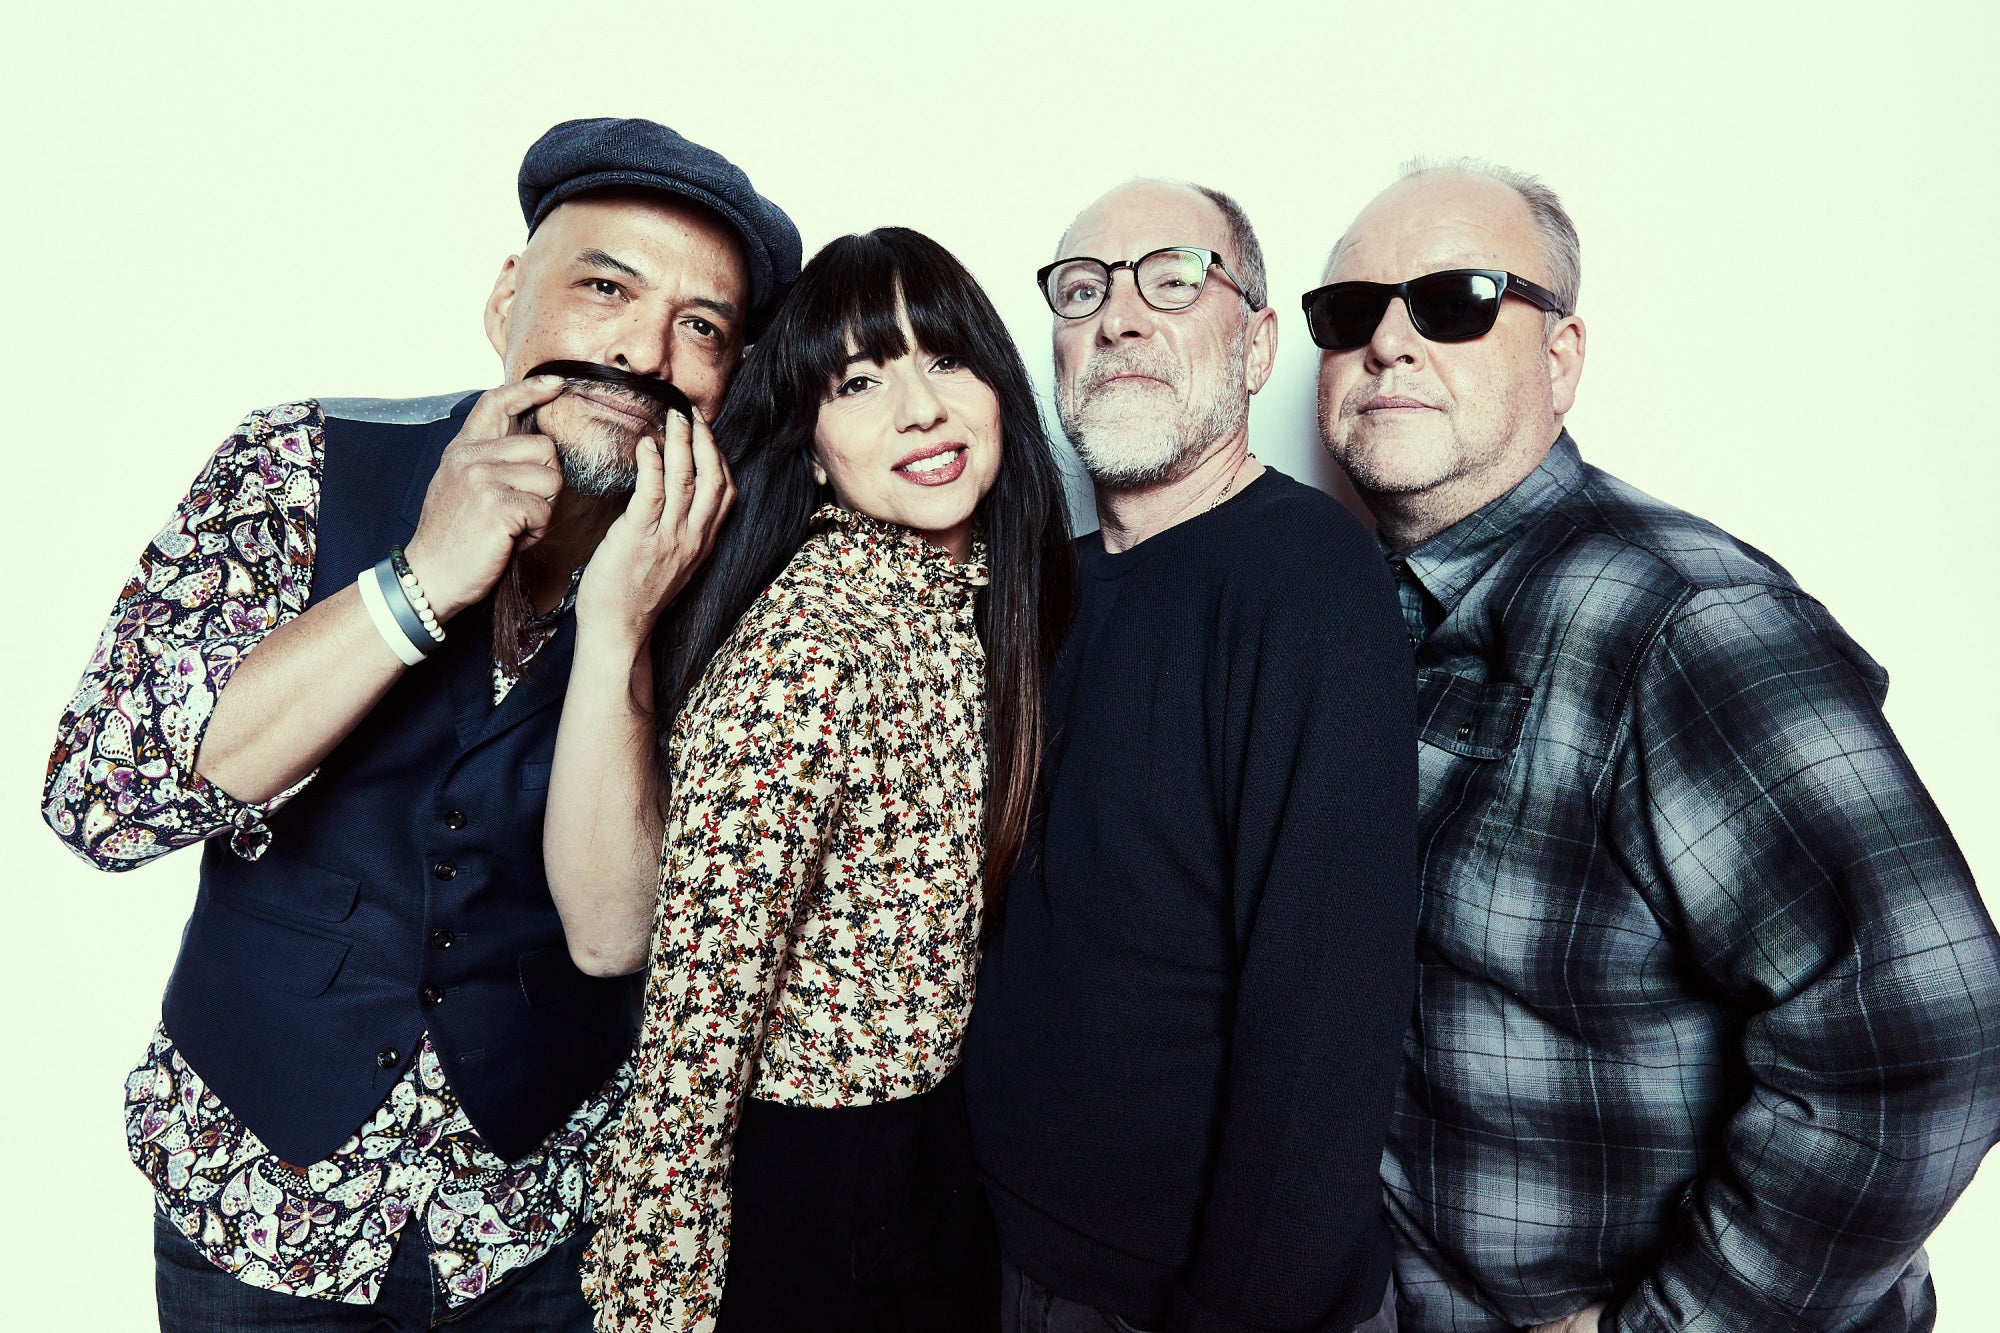 Pixies releasing new album this year. They describe it as "Doolittle Senior"